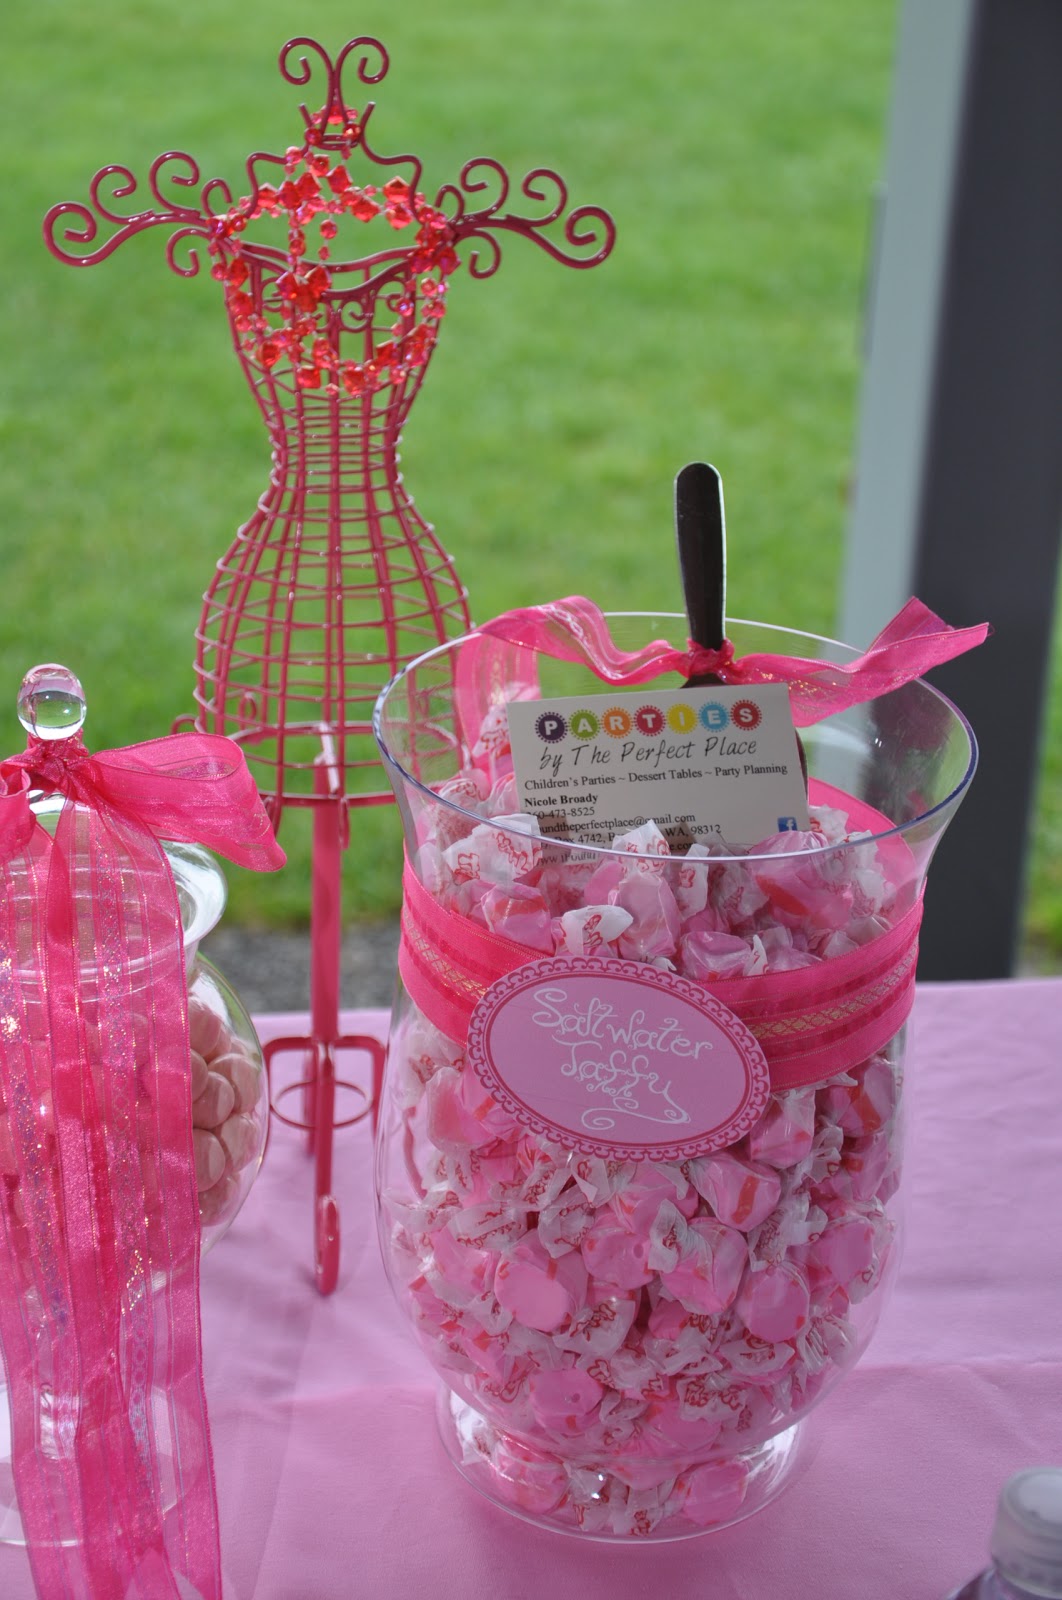 candy tables at weddings